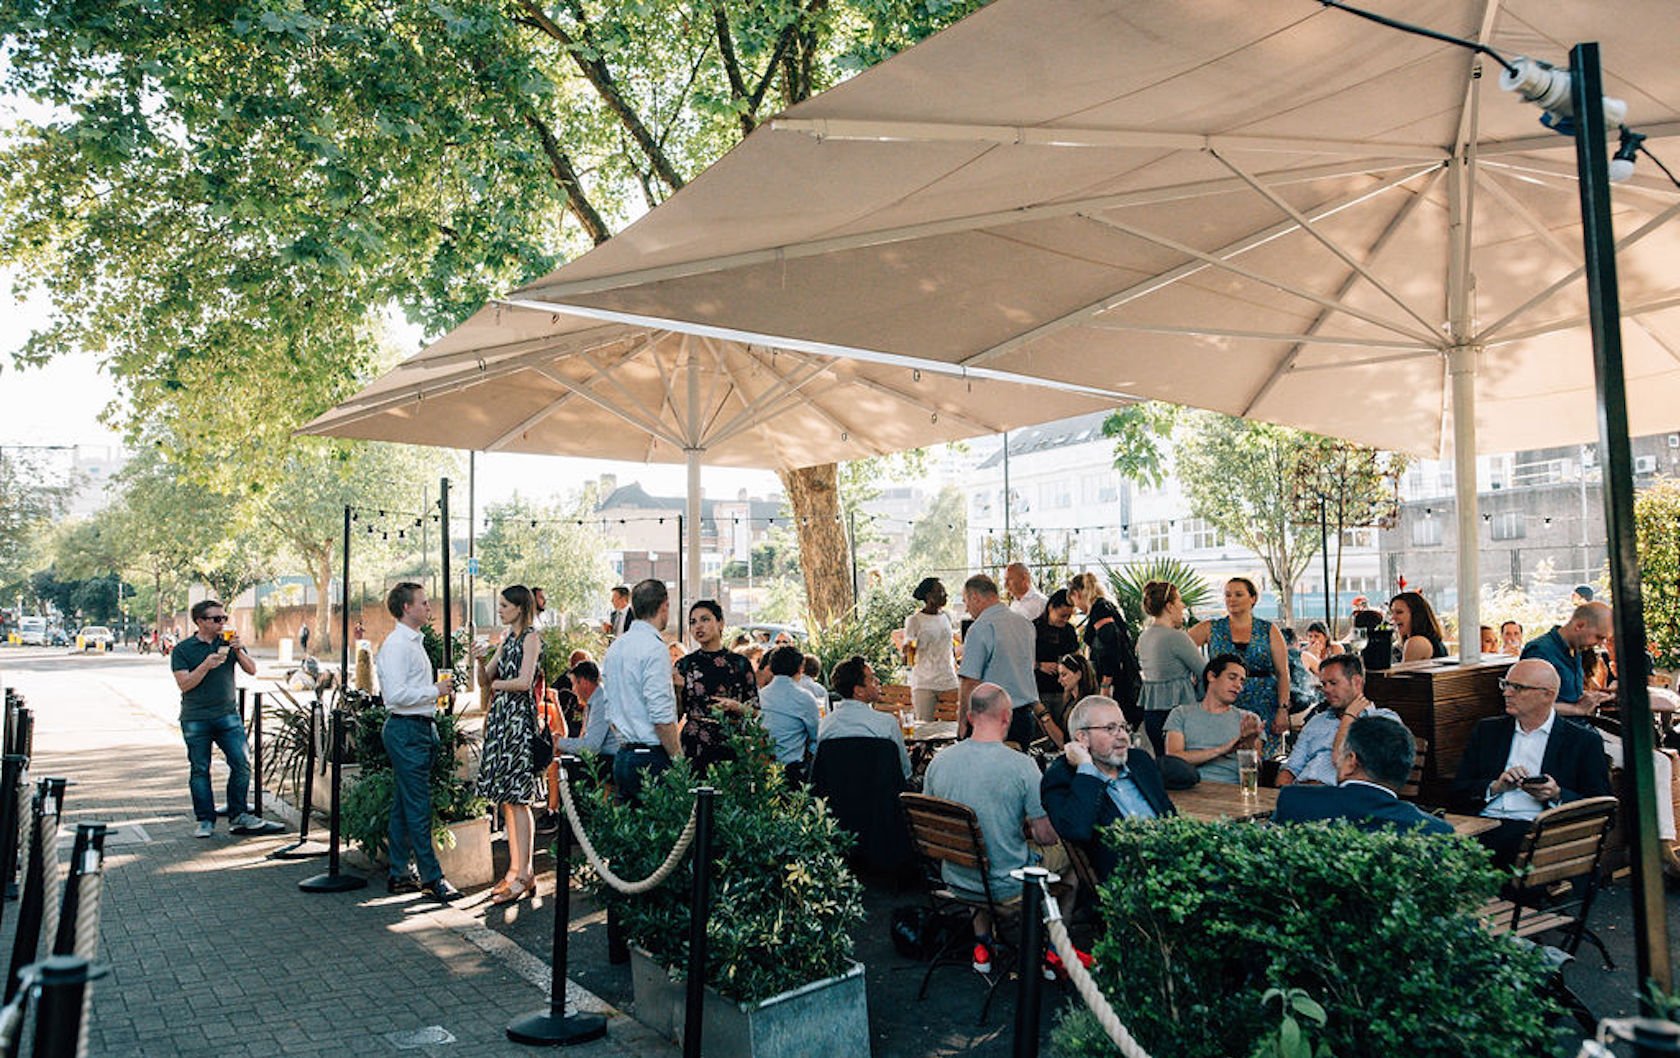 London Pub Beer Gardens by London Perfect